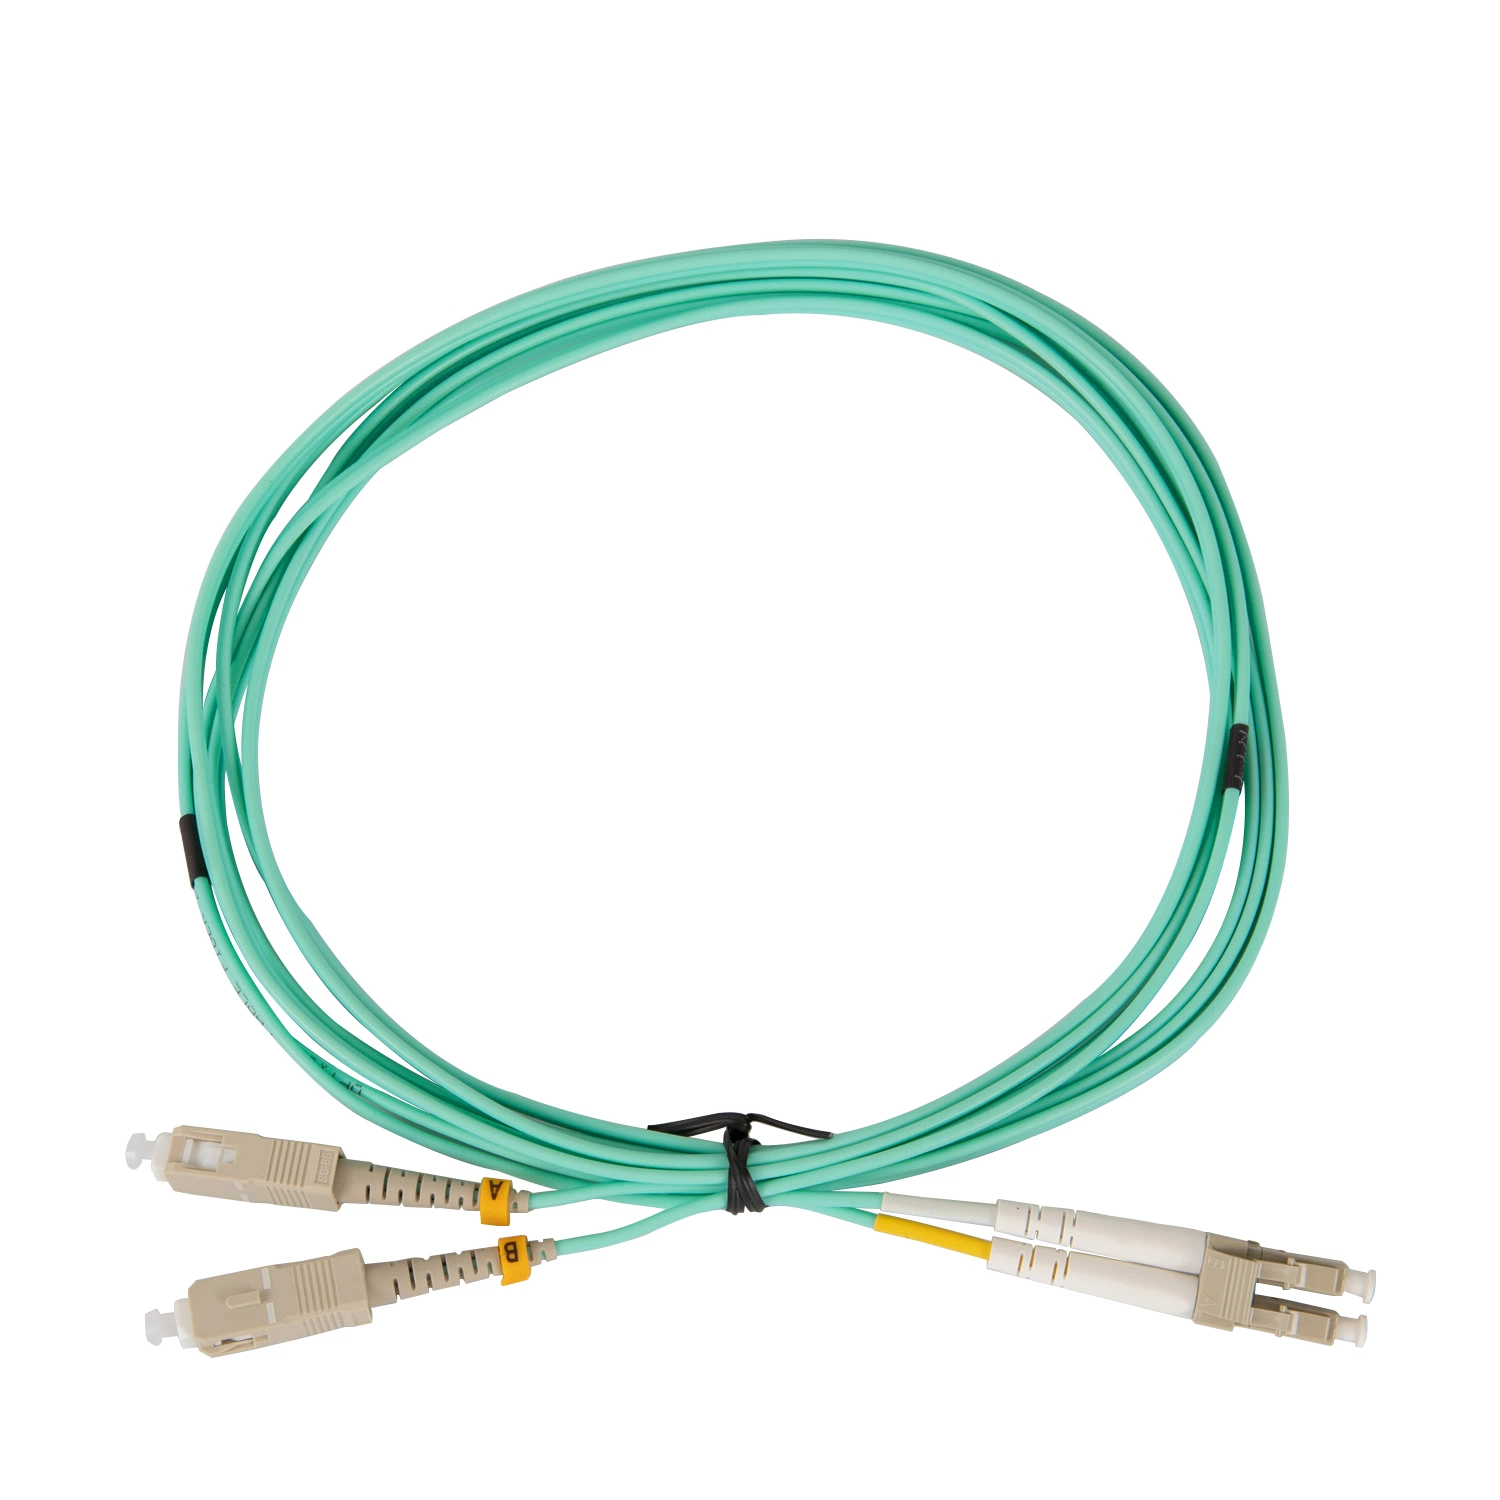 FTTH Drop Cable Cord 1meter 3FT LC to Sc Duplex 9/125 Single-Mode Fiber Optic Cable Jumper Optical Patch Cord LC-Sc